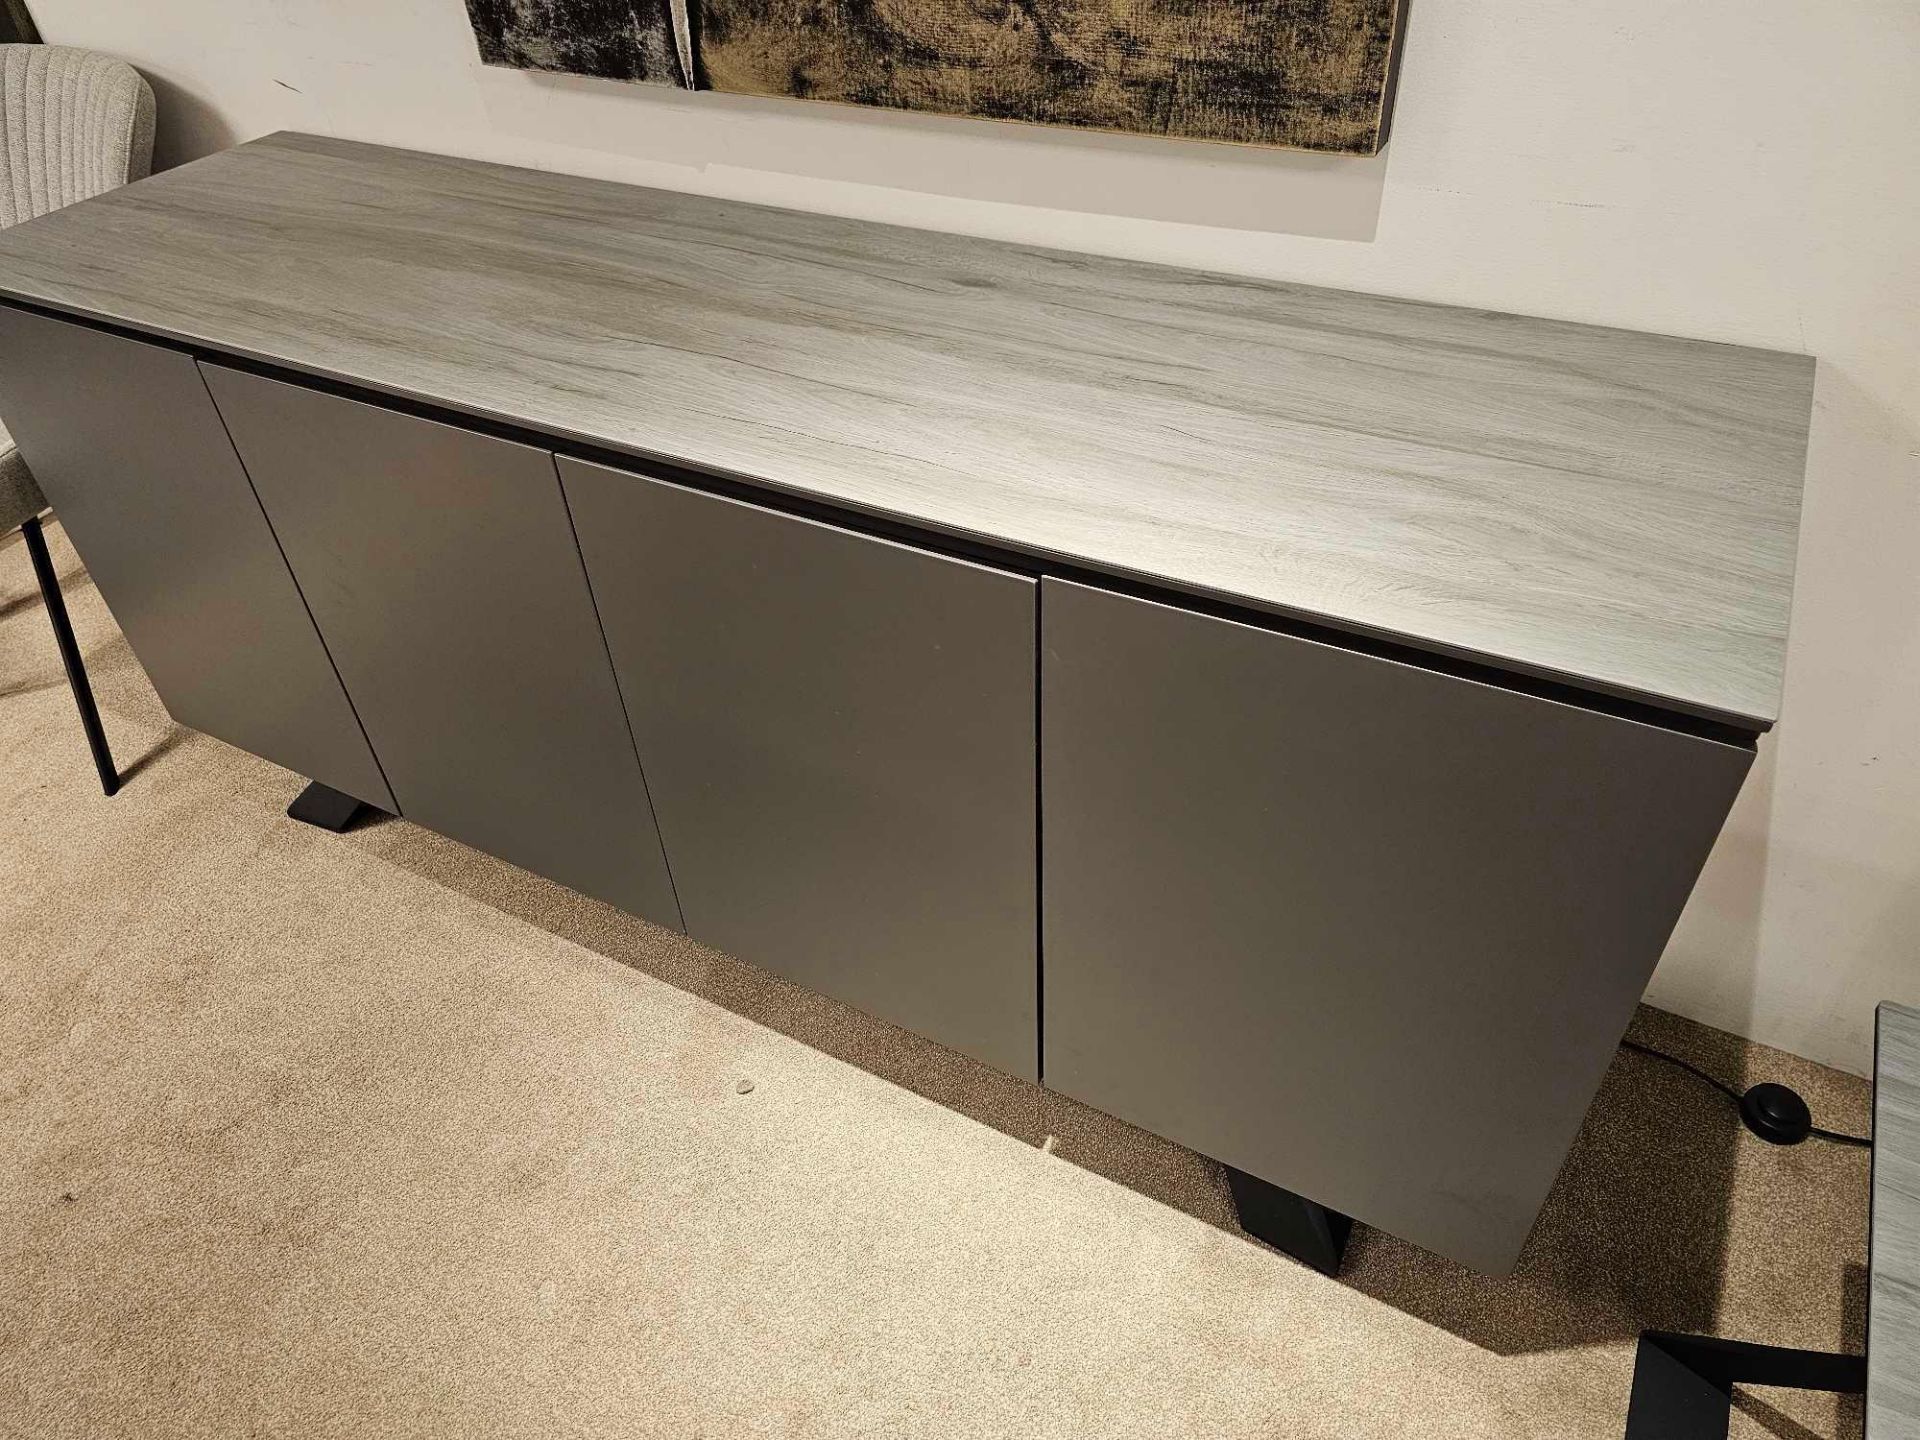 Spartan Sideboard by Kesterport The Spartan Four Door Sideboard provides is striking as a stand - Bild 5 aus 12